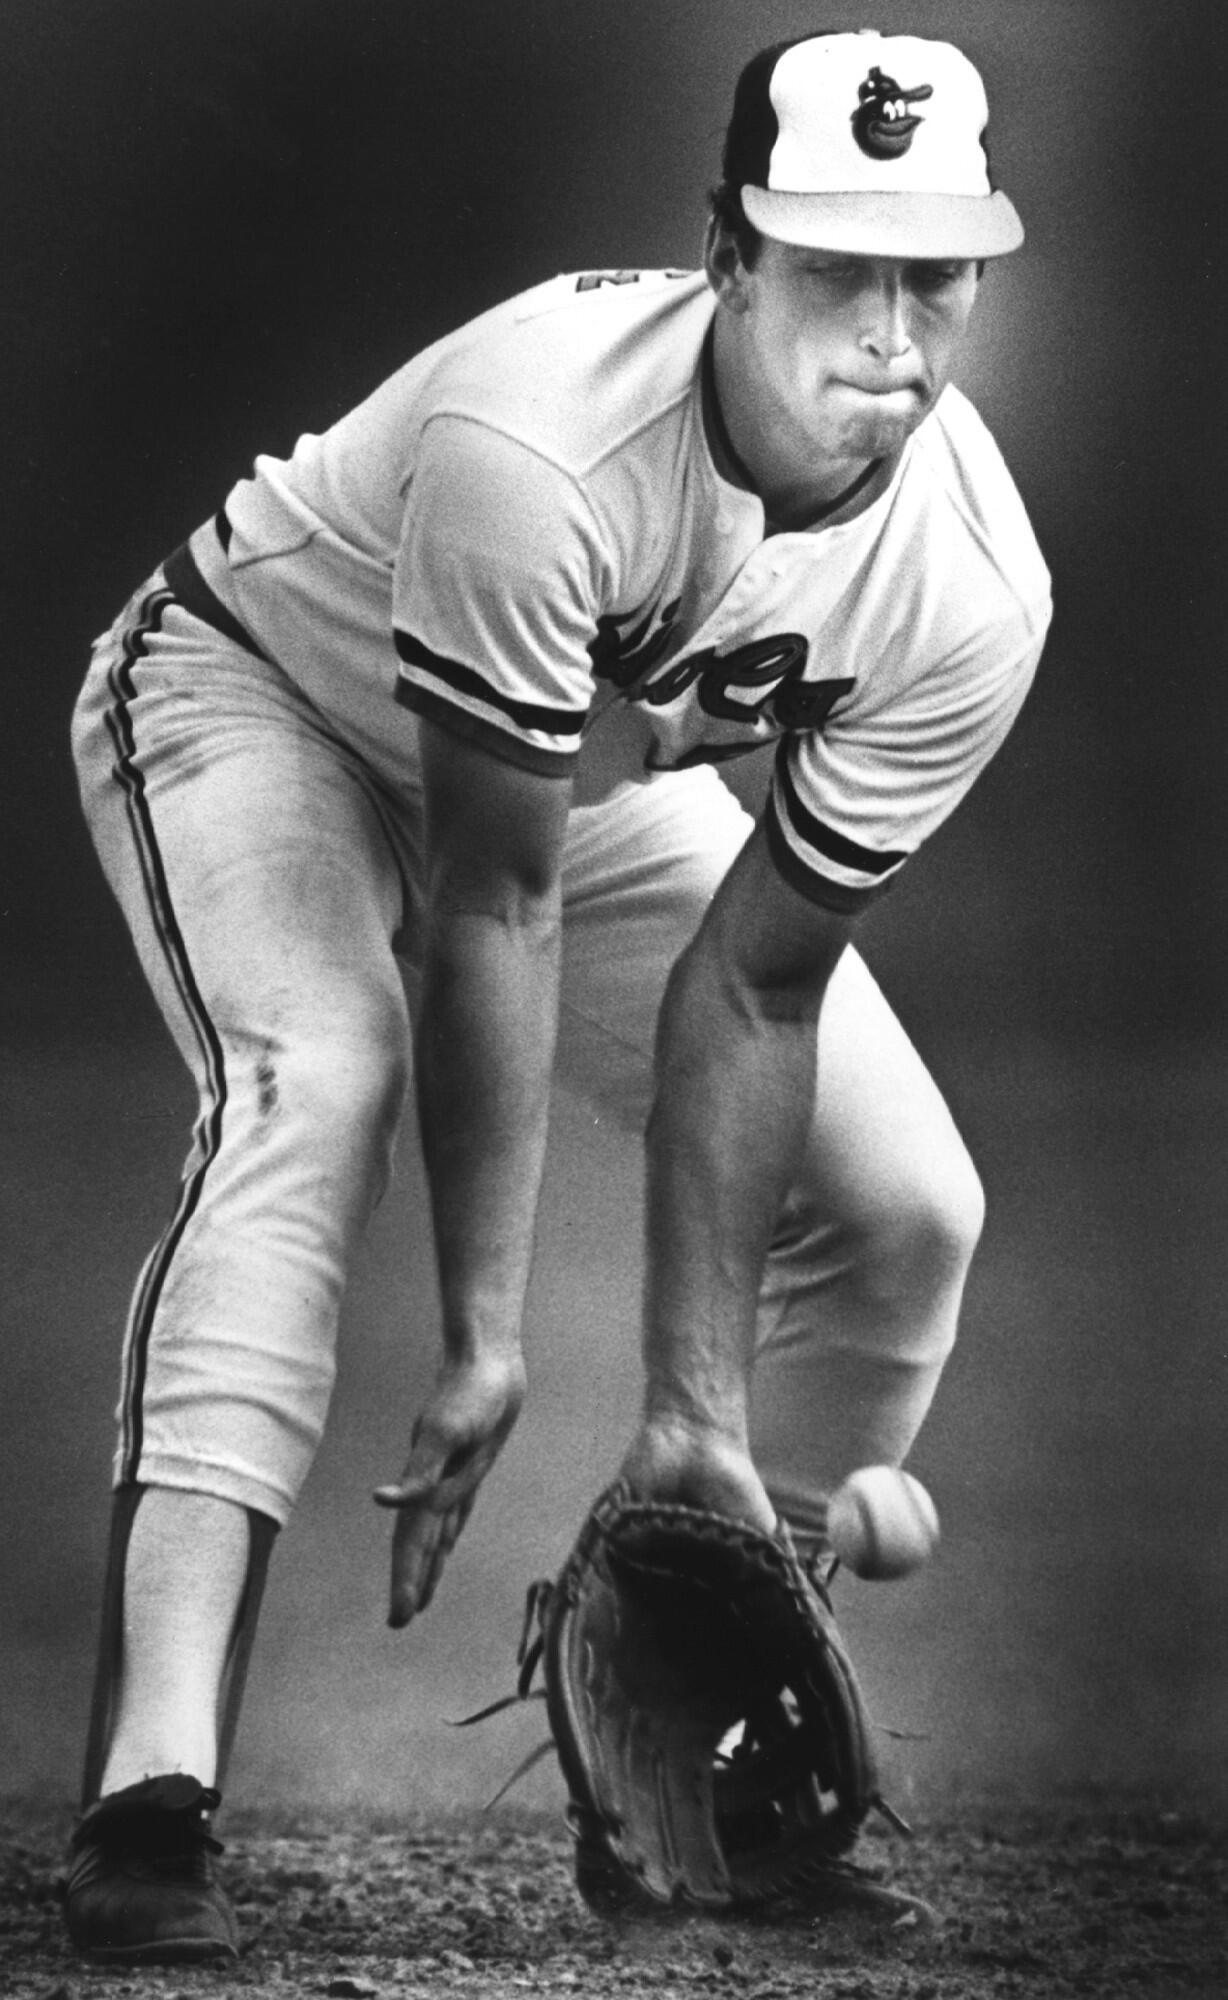 Cal Ripken Jr. scoops up a ground ball during infield practice at Miami Stadium. (February 1984)